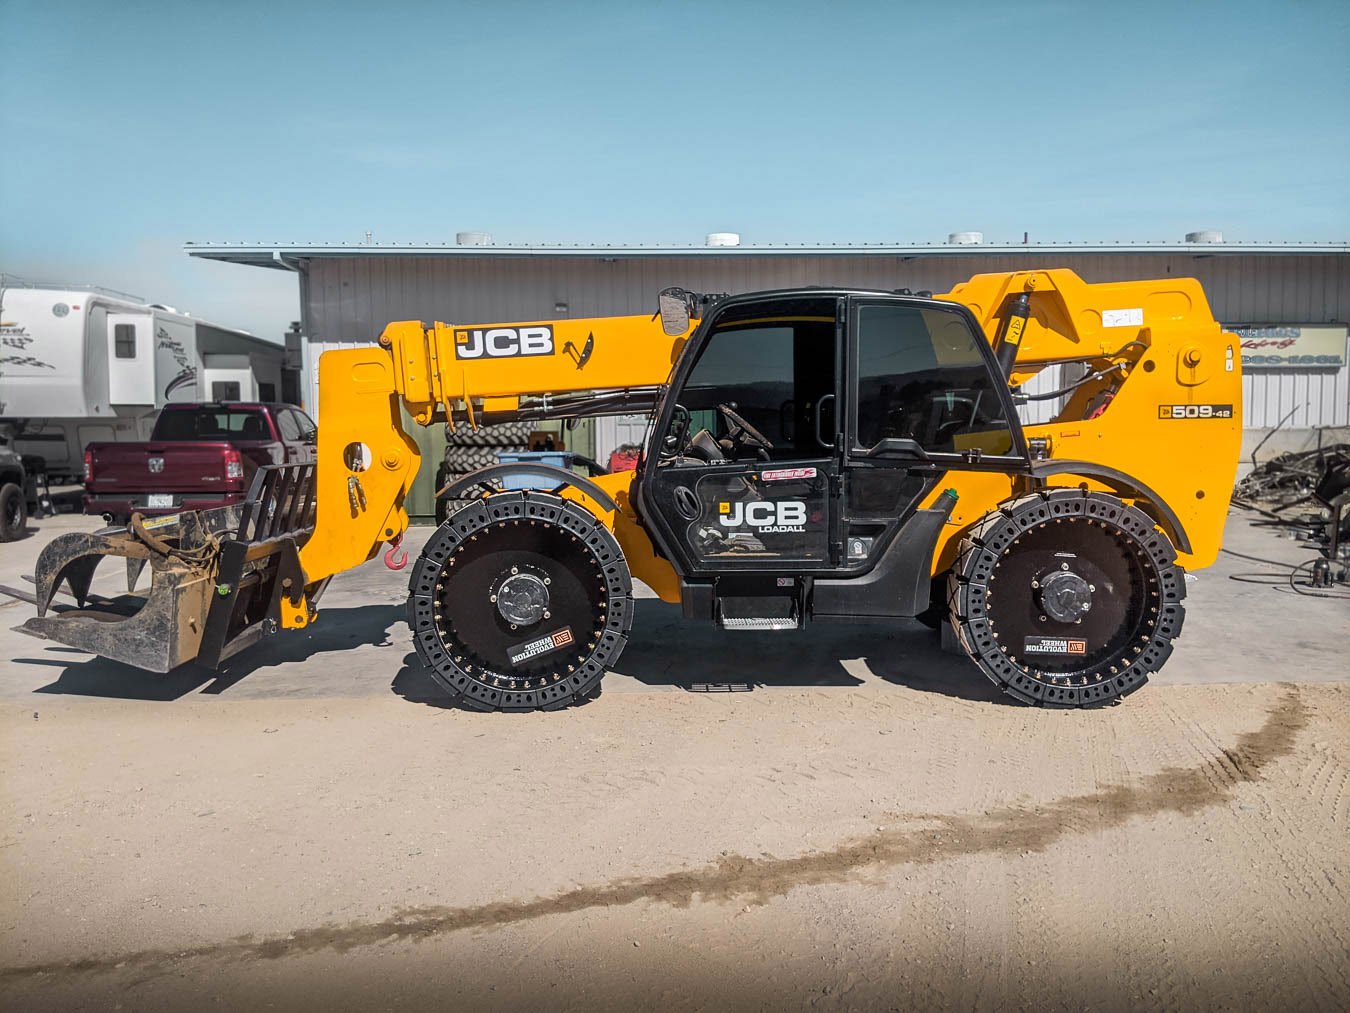 This picture shows our Gradall telehandler tires on a black and yellow JCB telehandler